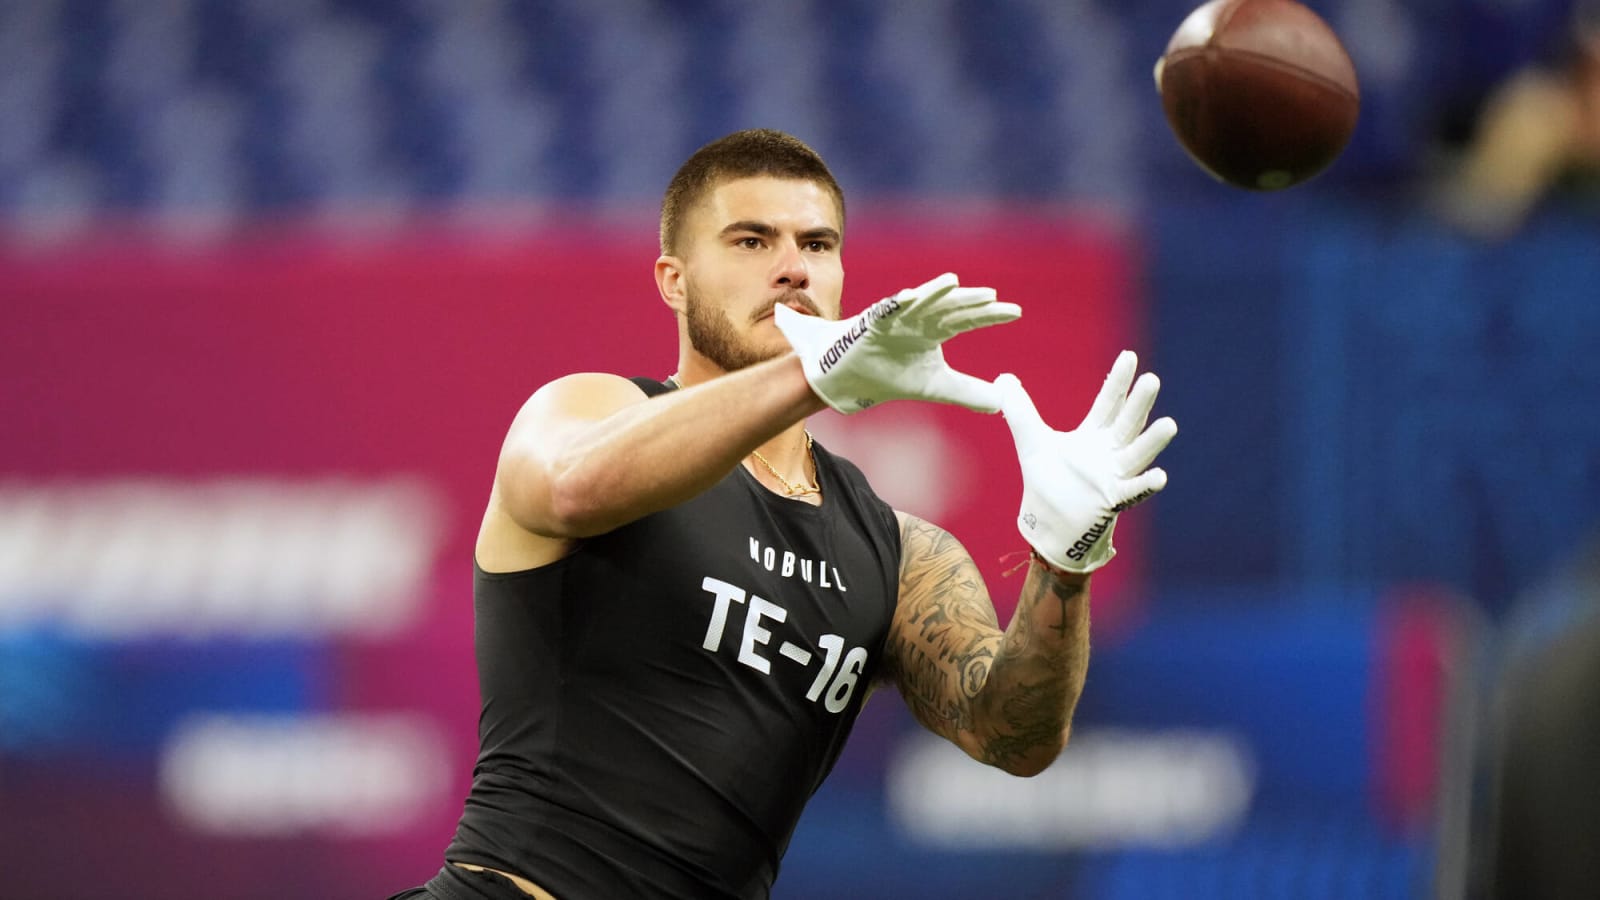 Jared Wiley rookie contract details with Kansas City Chiefs revealed after NFL Draft